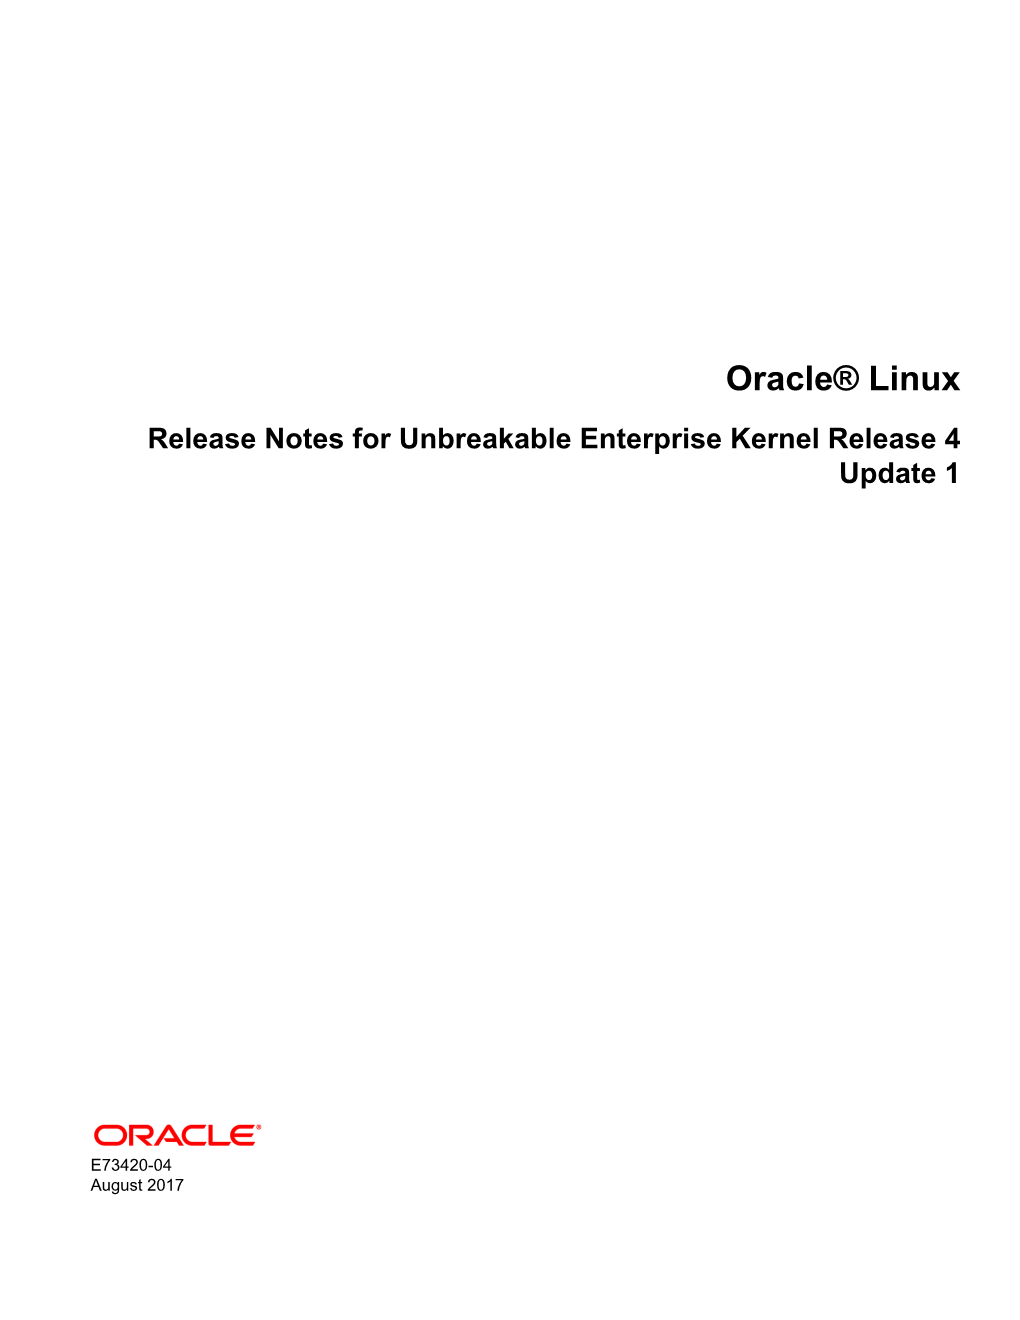 Oracle® Linux Release Notes for Unbreakable Enterprise Kernel Release 4 Update 1